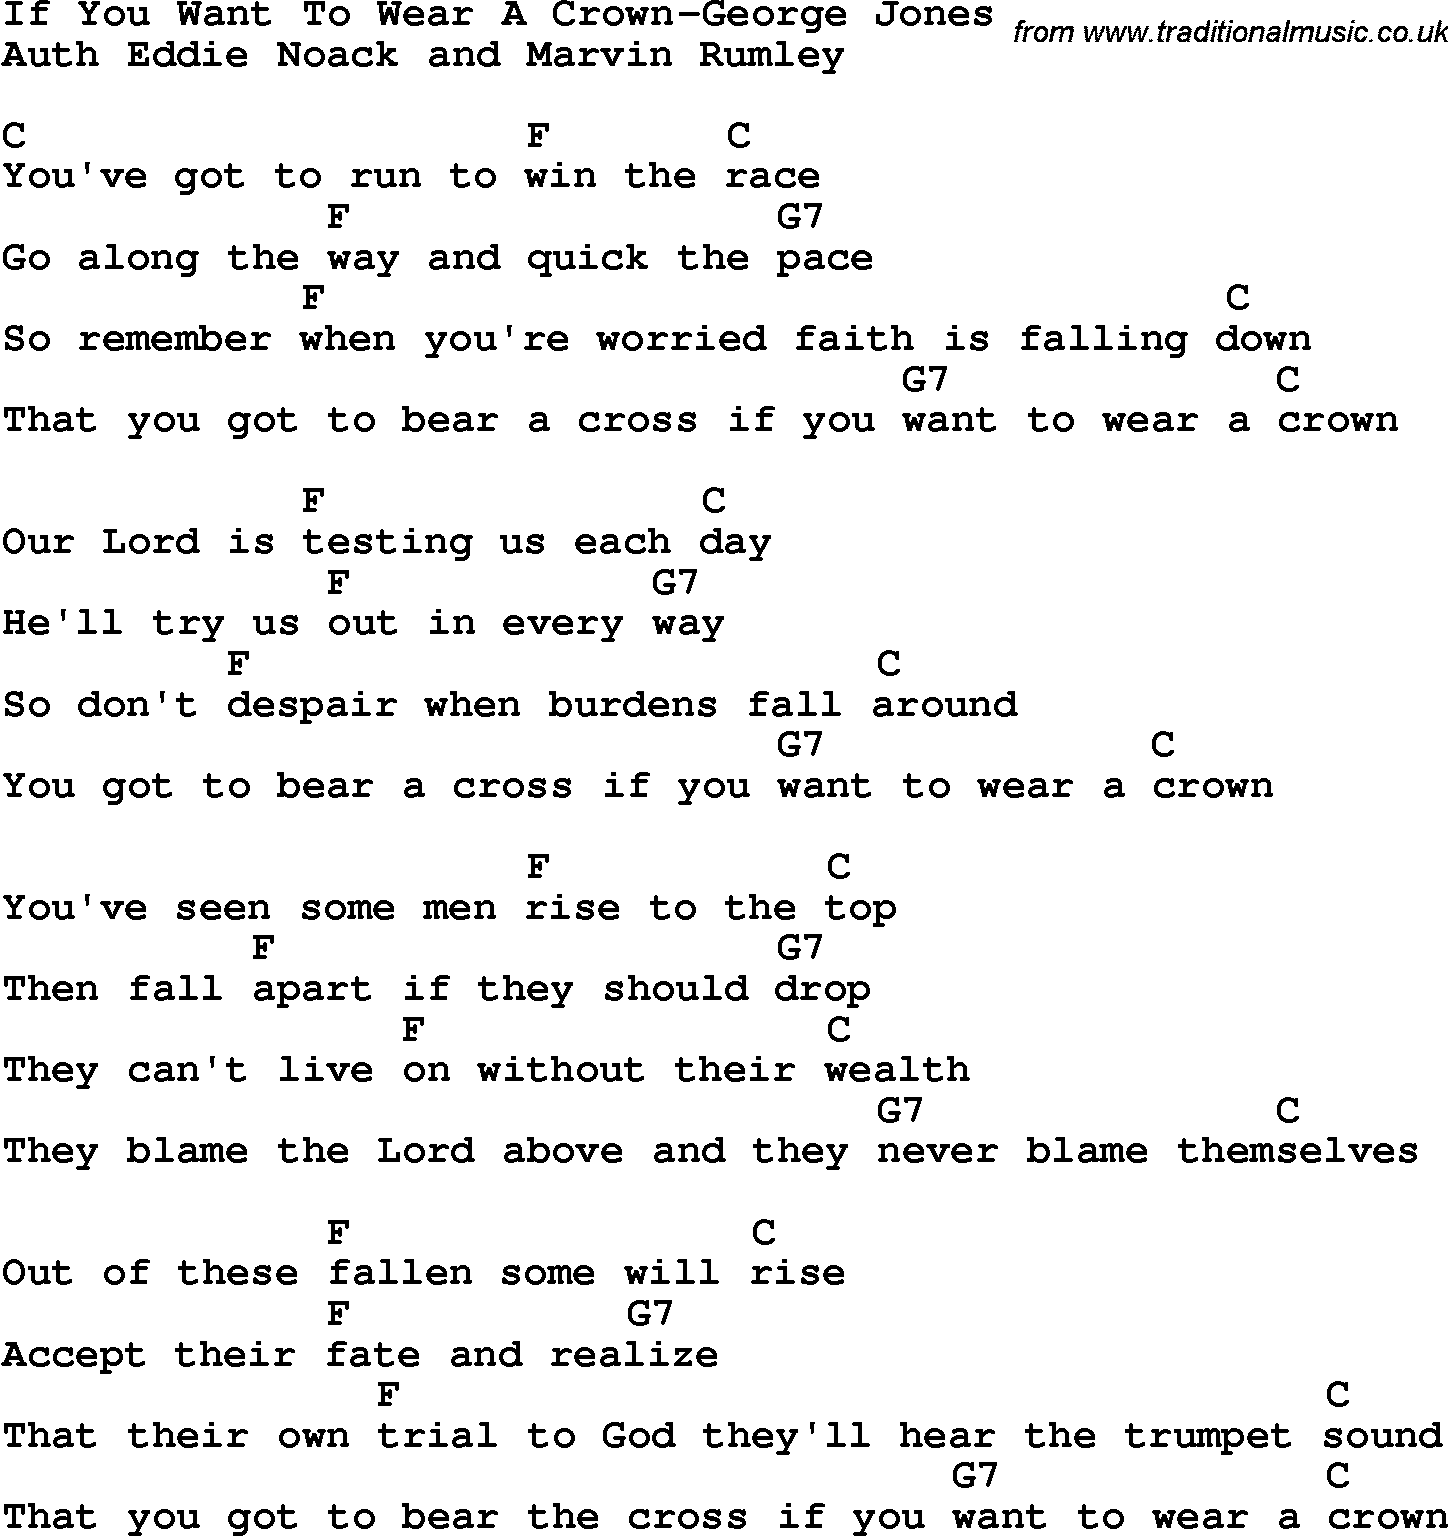 Country, Southern and Bluegrass Gospel Song If You Want To Wear A Crown-George Jones lyrics and chords